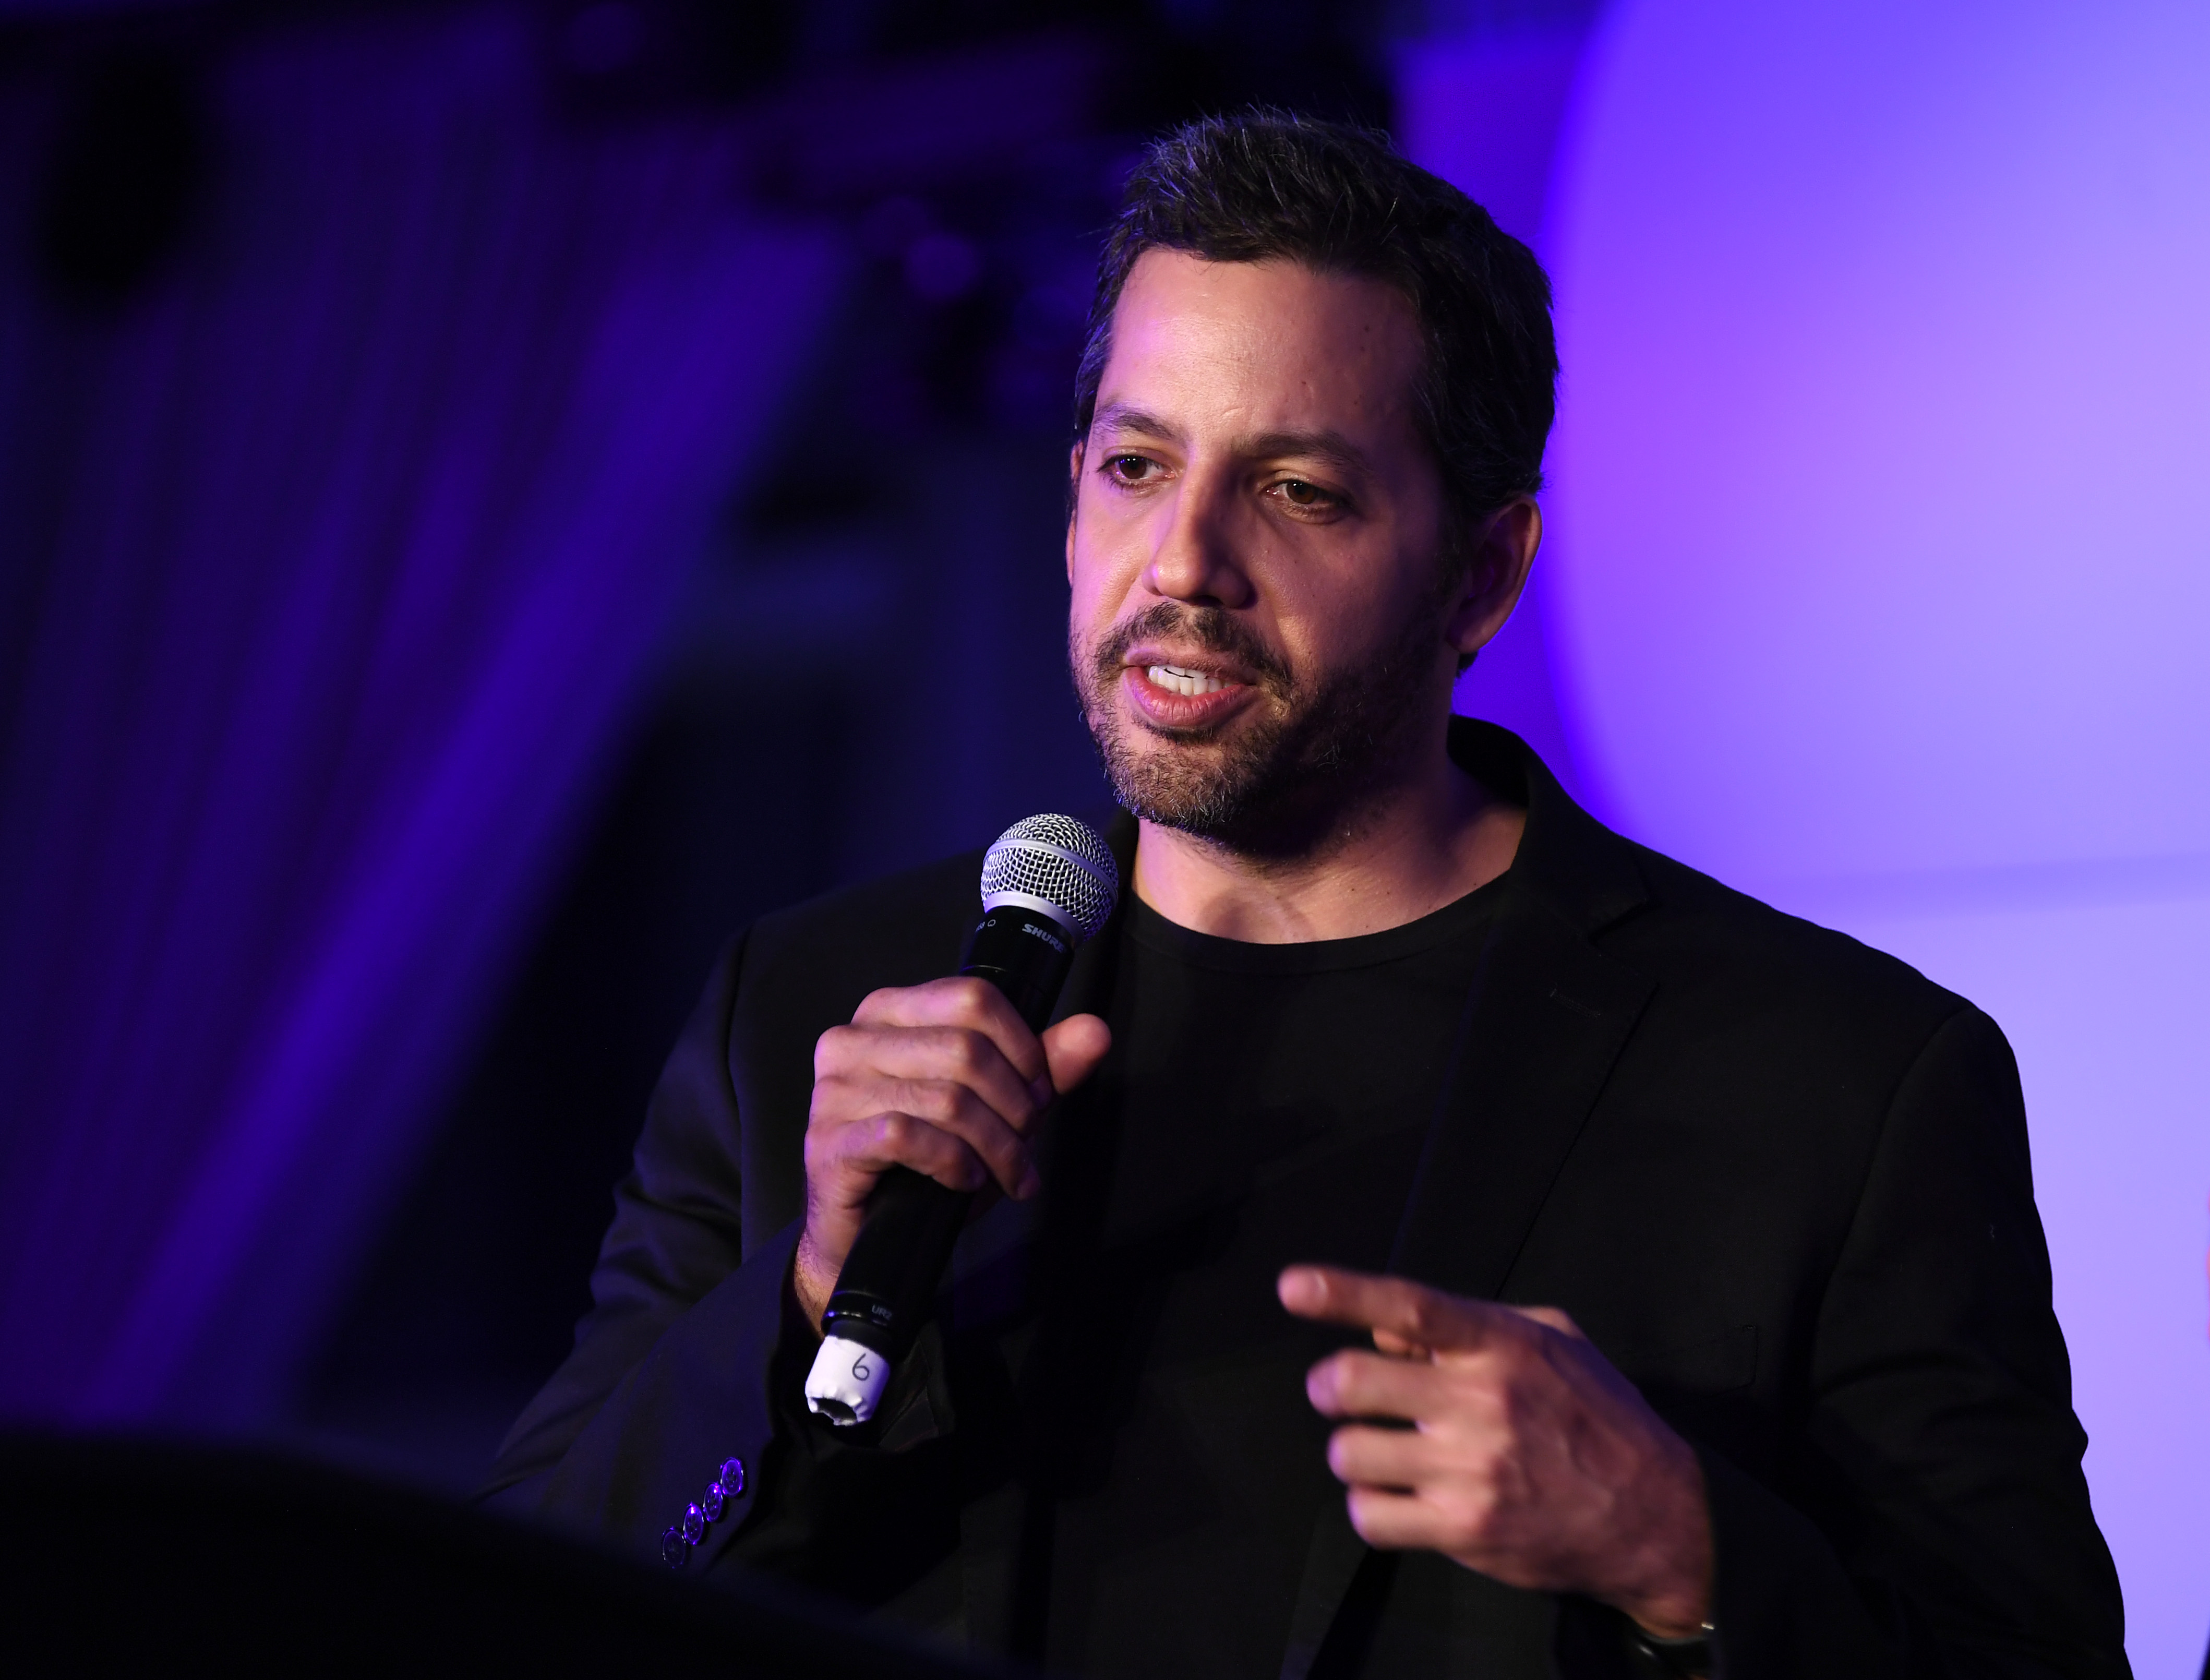 Magician David Blaine speaks during Genius Gala 6.0 at Liberty Science Center in Jersey City, New Jersey, on May 5, 2017. (Dave Kotinsky—Liberty Science Center/Getty Images)